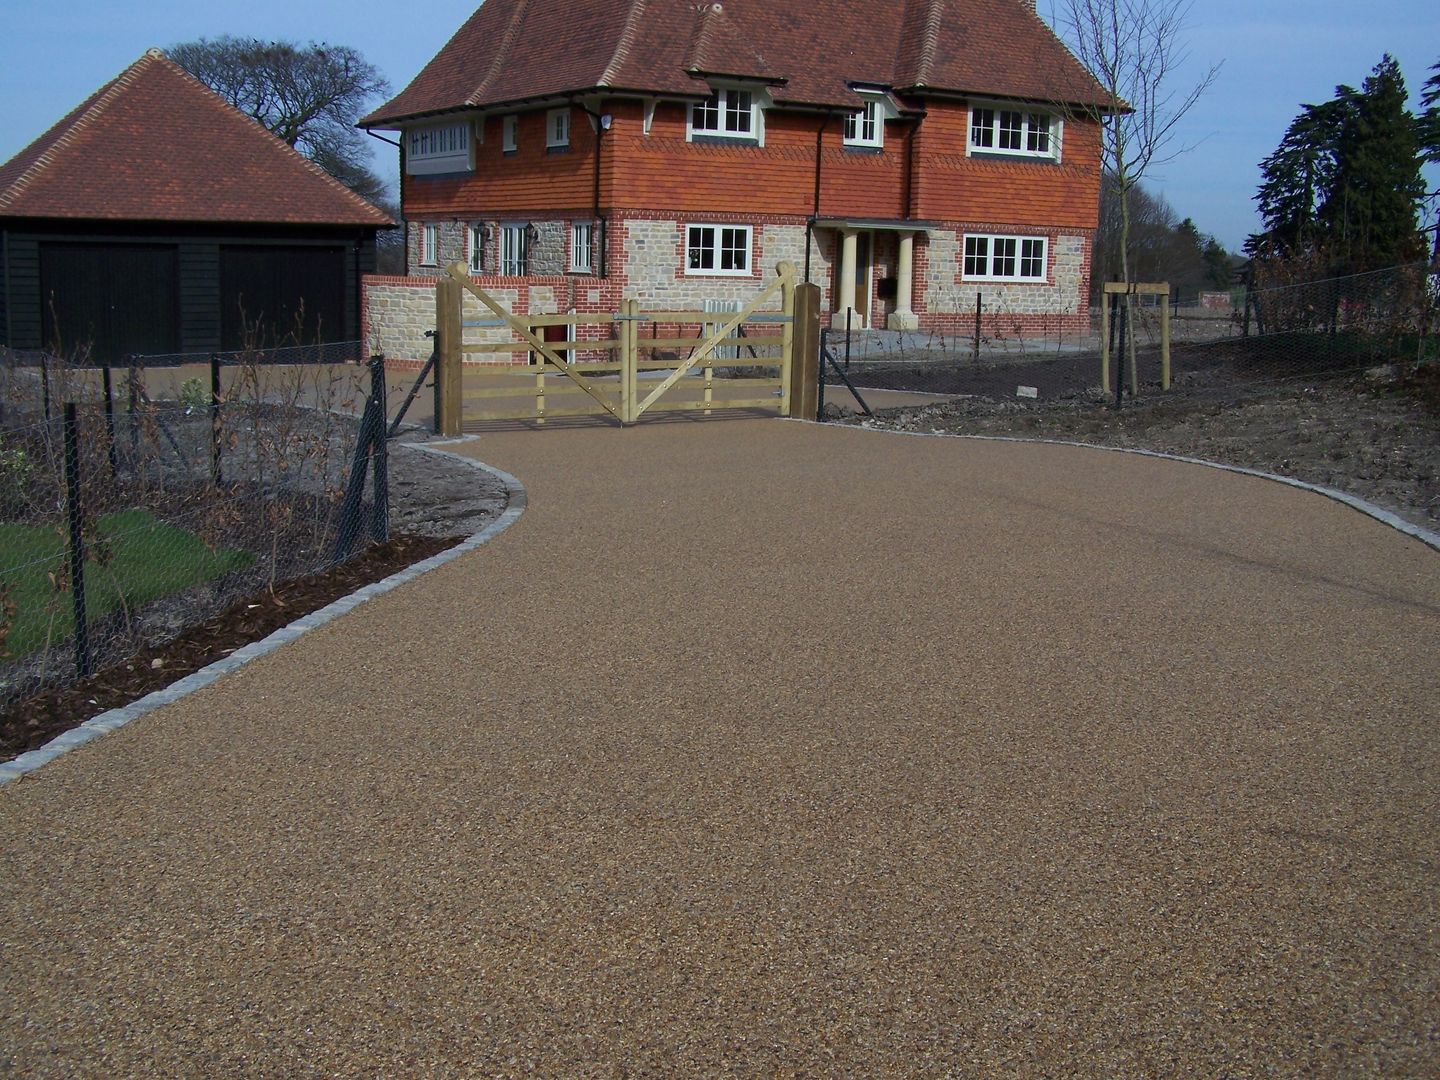 Domestic Driveways installation of resin bound paving, Permeable Paving Solutions UK Permeable Paving Solutions UK Walls